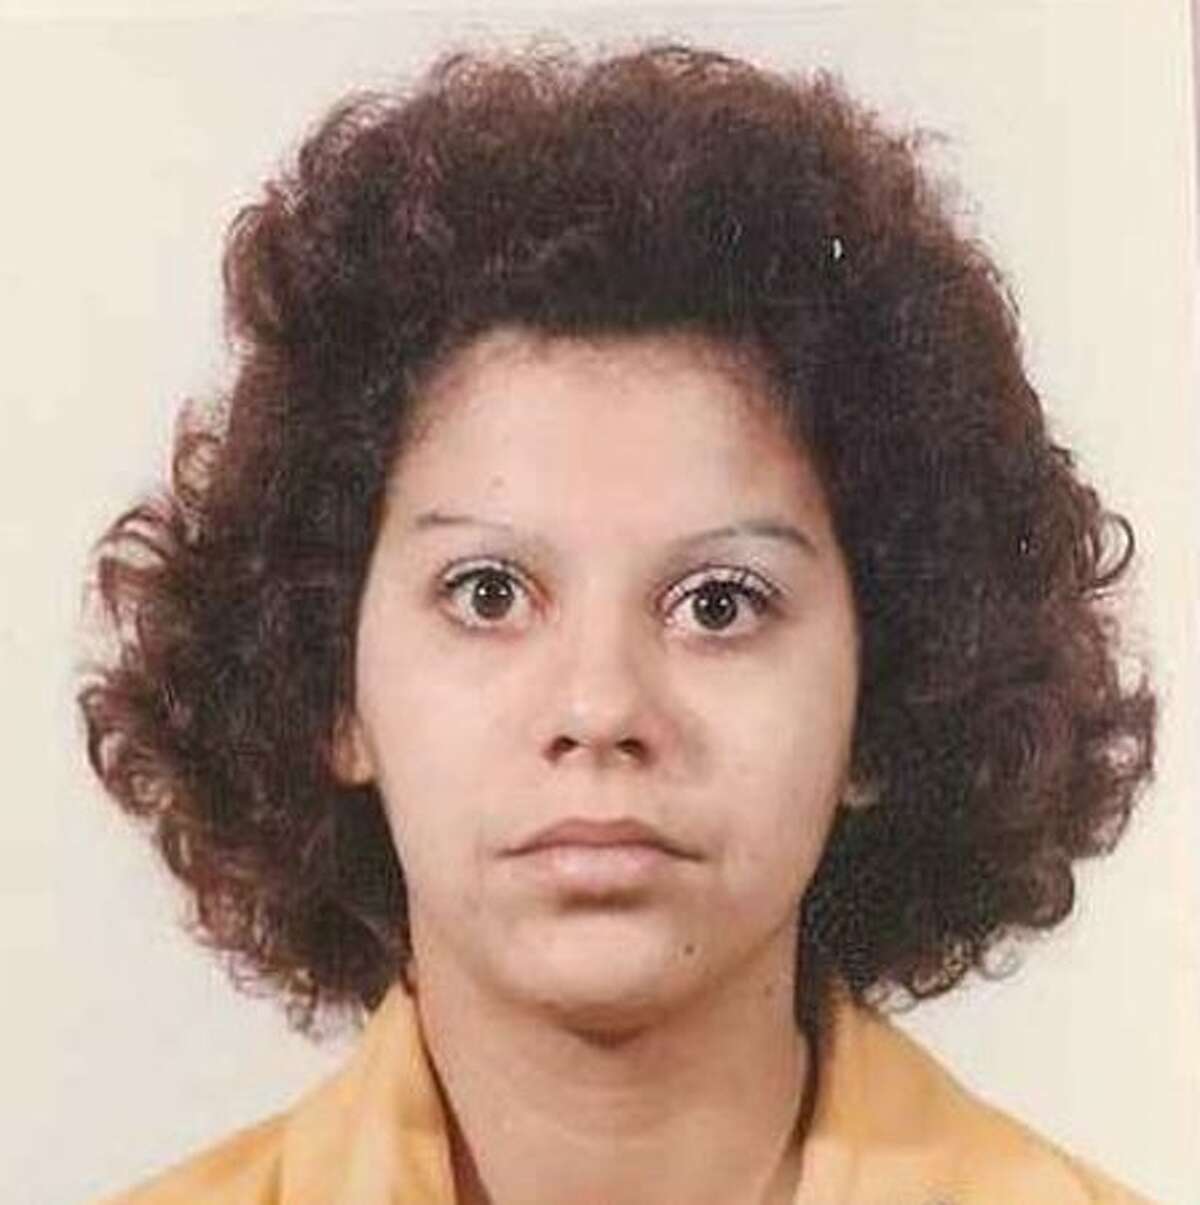 Becky Marrero was believed to have been killed in 1982 when she was 20 and had a 2-year-old child. Believed to have been a victim of Green River Killer Gary Ridgway, she was found in Dec. 2010 near an Auburn ravine. (King County Sheriff's Office photo)